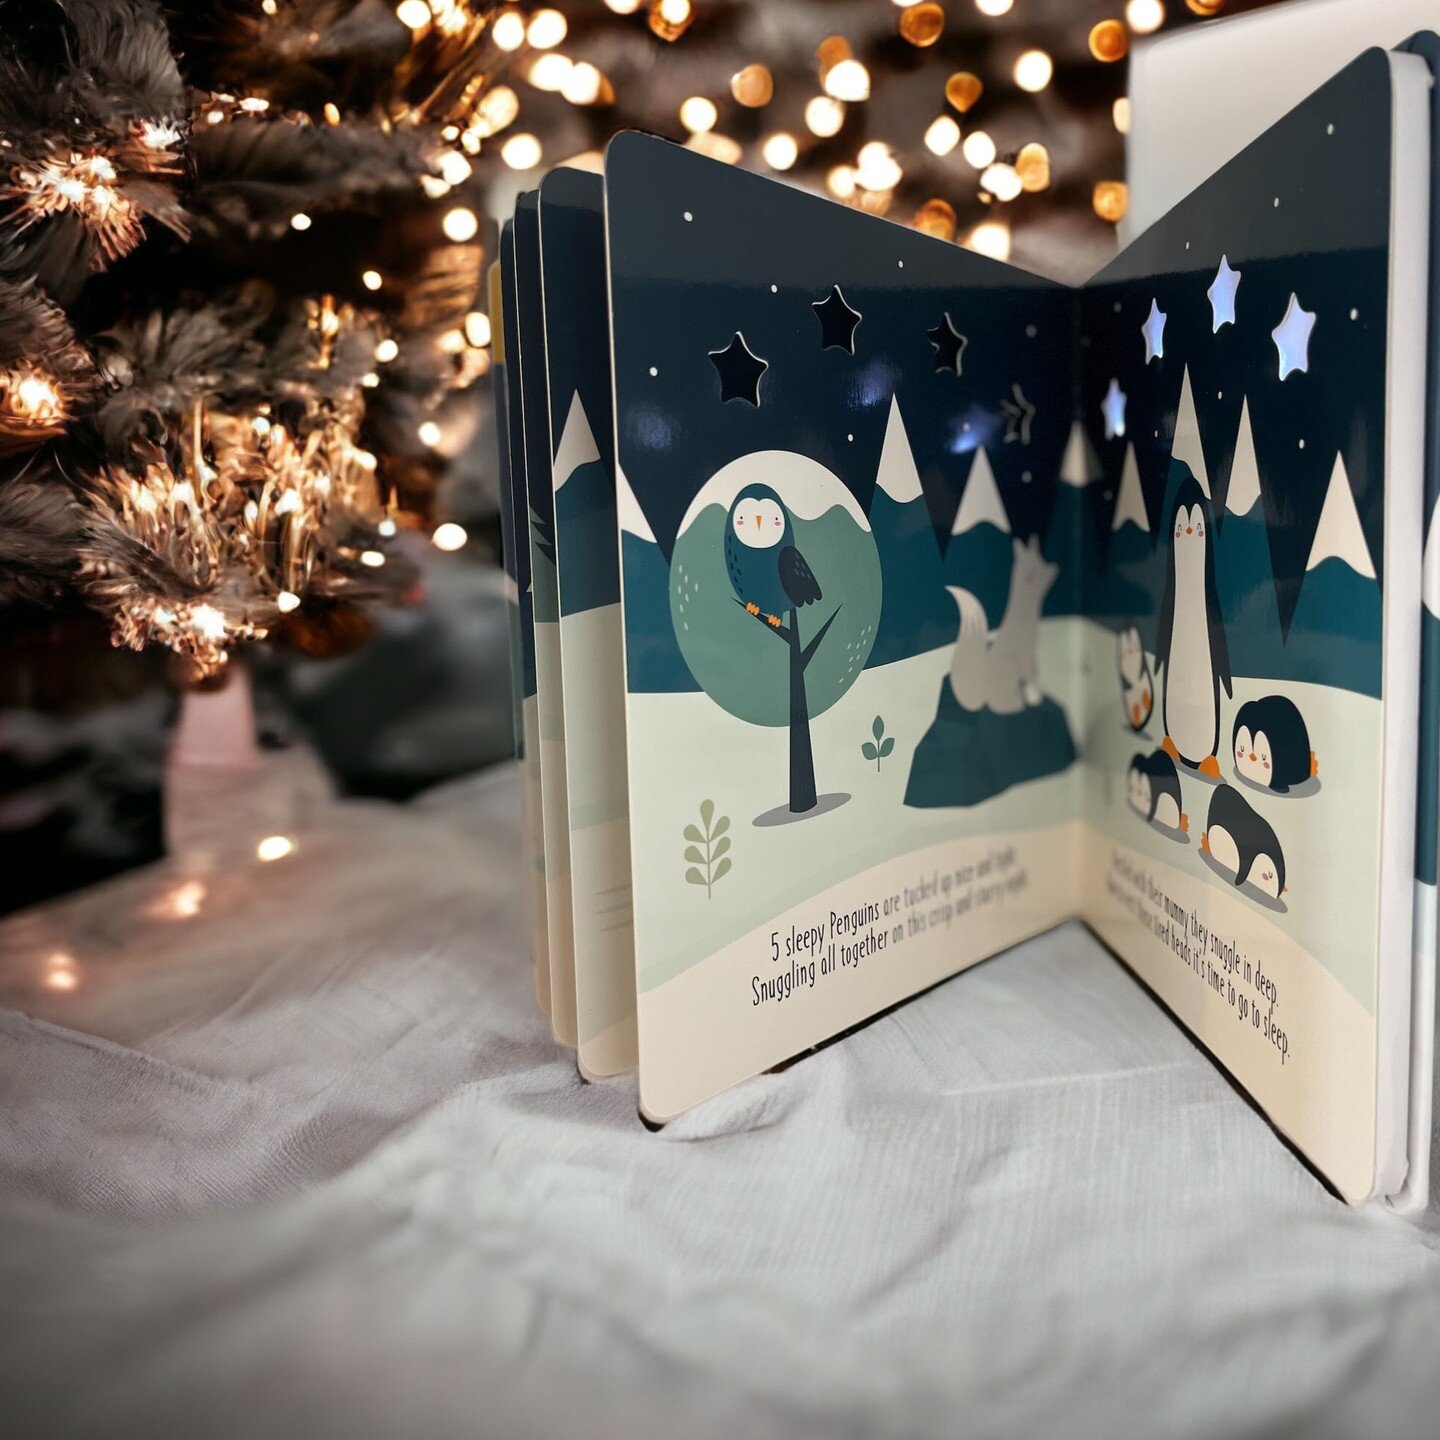 Happy 1st December! We're officially feeling FESTIVE 🎄🌟
&bull;
#bookworm #books #childrensbooks #childrensbookpublishers #animals #lightup #lightupbook #penguins #stars #interactive #interactivebooks #funlearning #boardbook #series #bookseries #boo